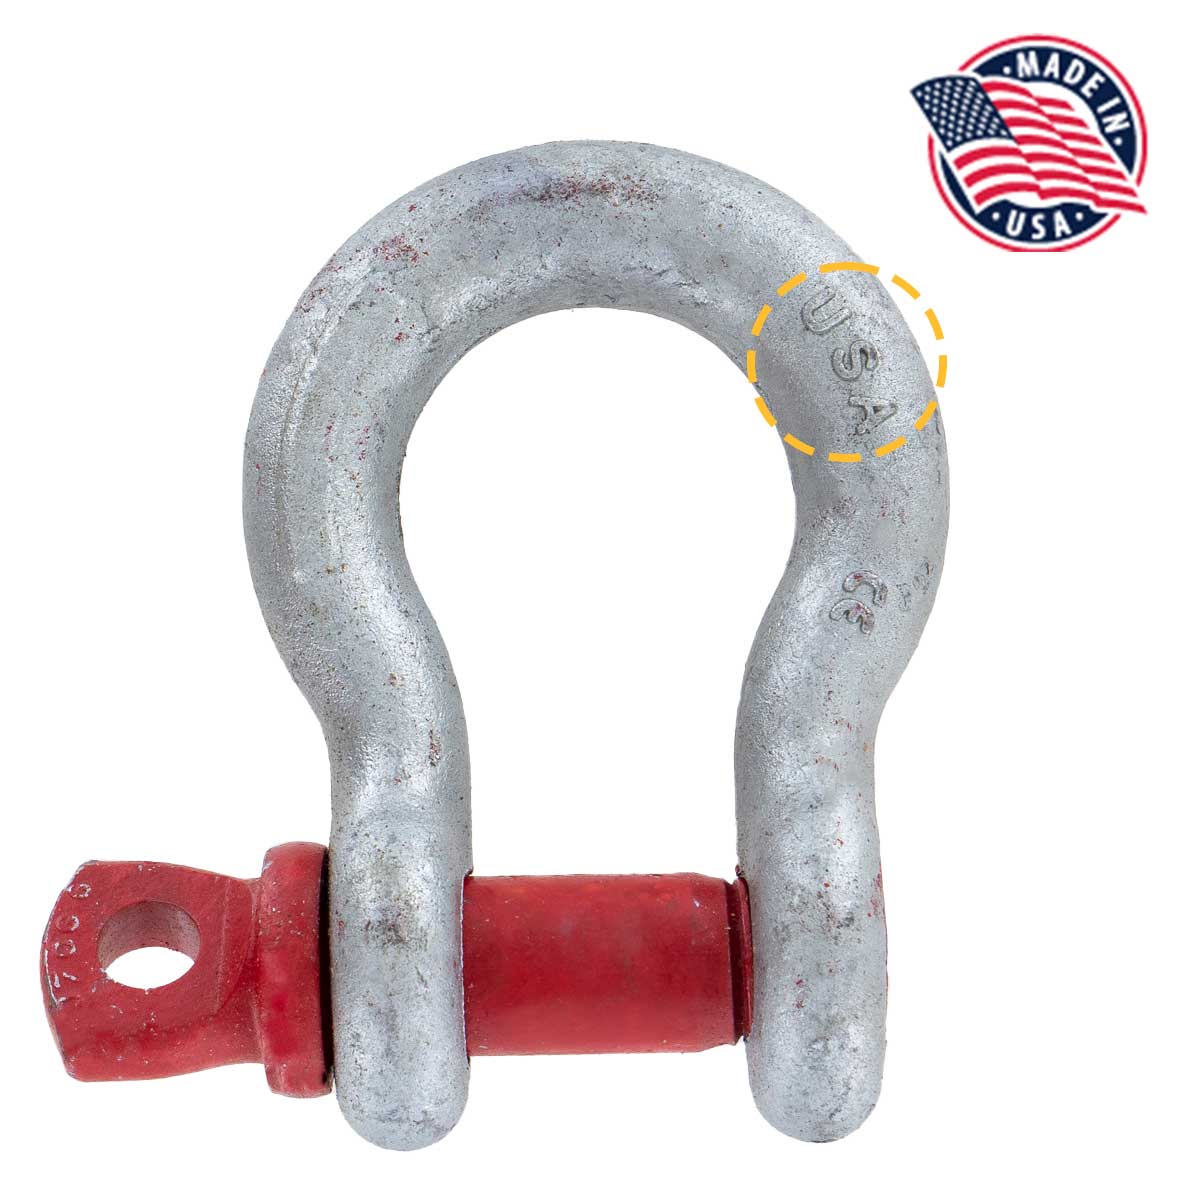 3/8" Crosby® Screw Pin Anchor Shackle | G-209 - 1 Ton made in USA